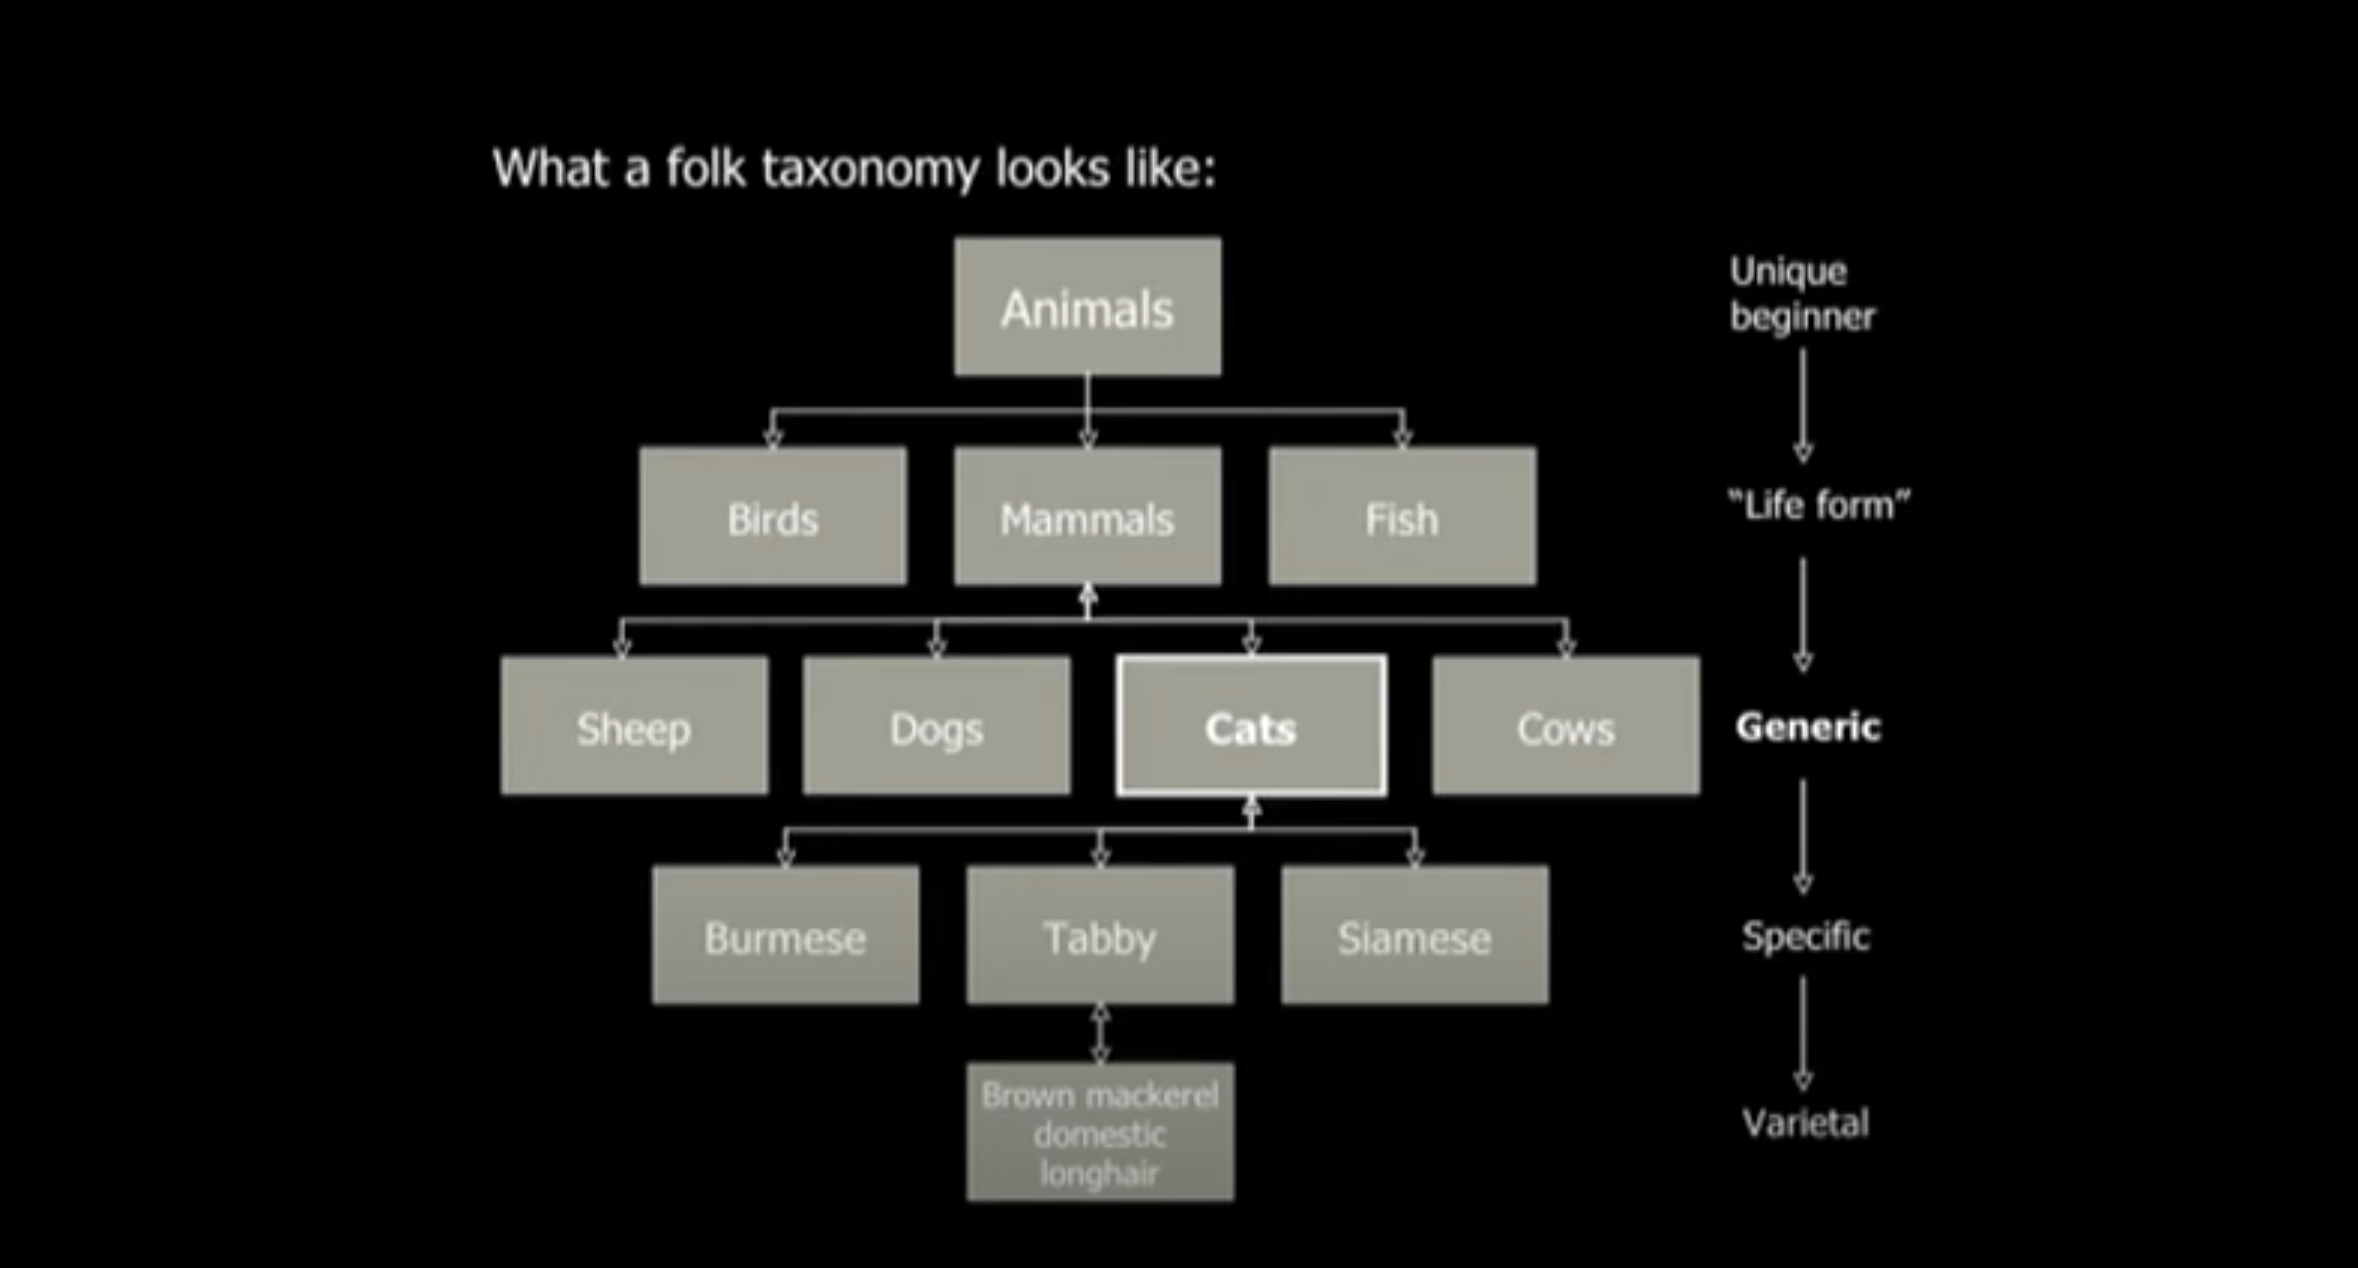 A folk Taxonomy showing the hierarchy of animals, mammals, cats, and Tabby. by Alex Wright